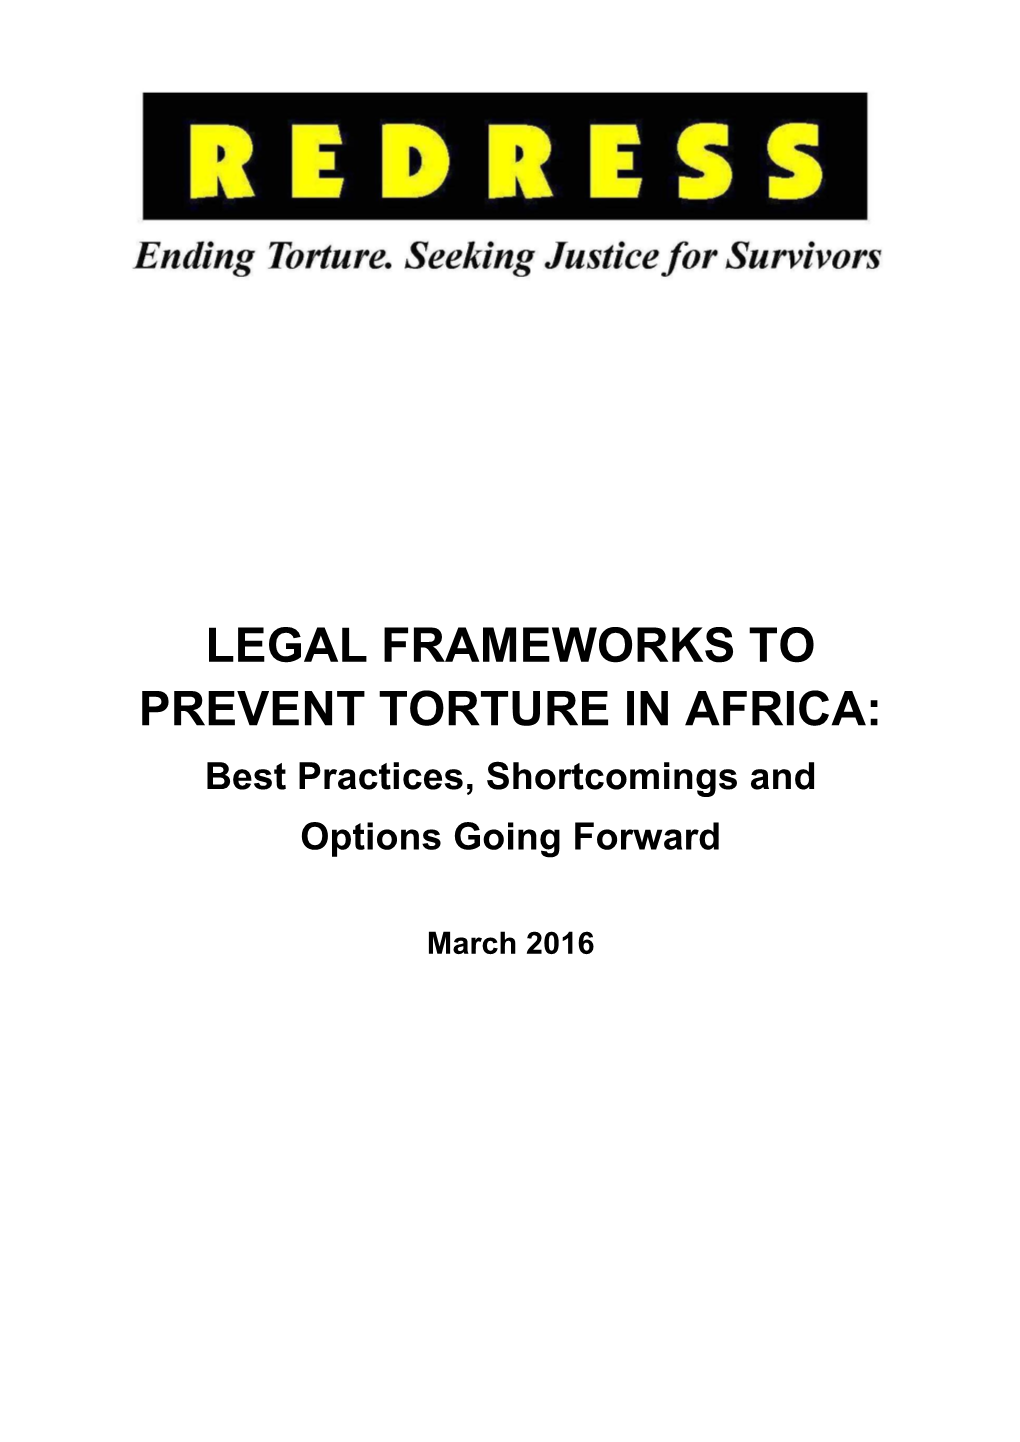 LEGAL FRAMEWORKS to PREVENT TORTURE in AFRICA: Best Practices, Shortcomings and Options Going Forward